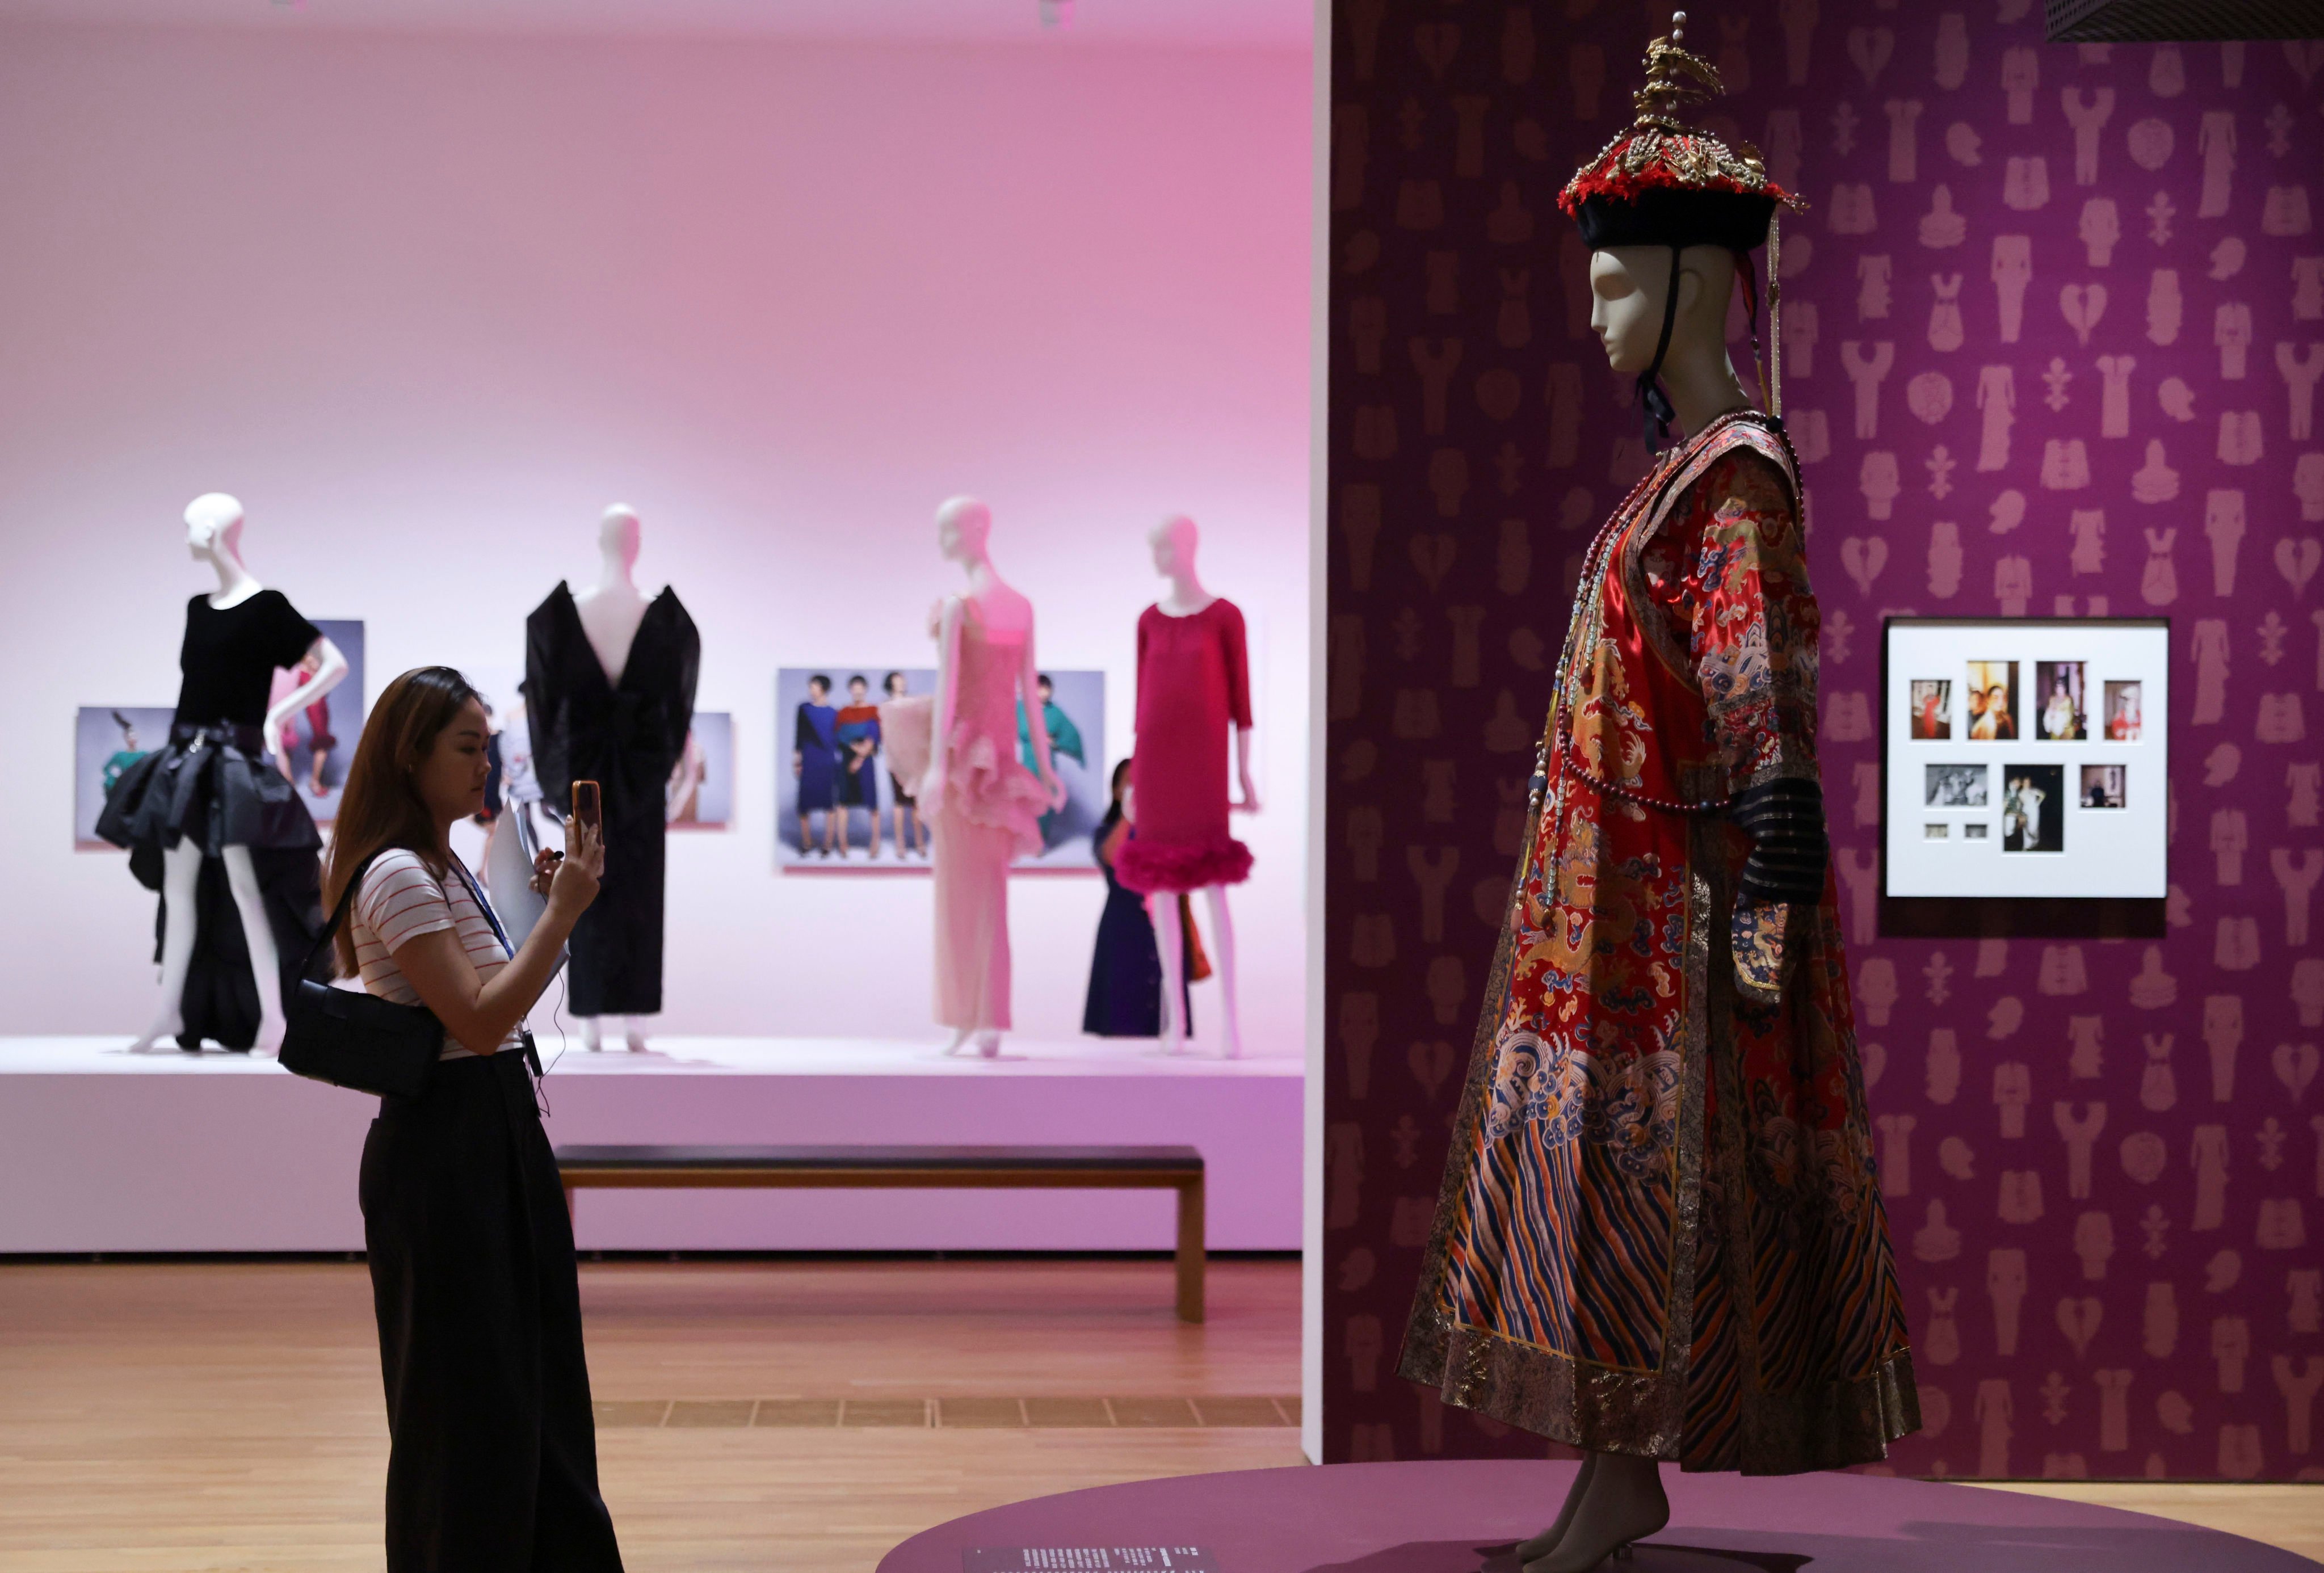 Chinese influencer Song Huai-kuei, who died in 2006, is celebrated in M+ museum’s “Madame Song: Pioneering Art and Fashion in China”. Photo: May Tse